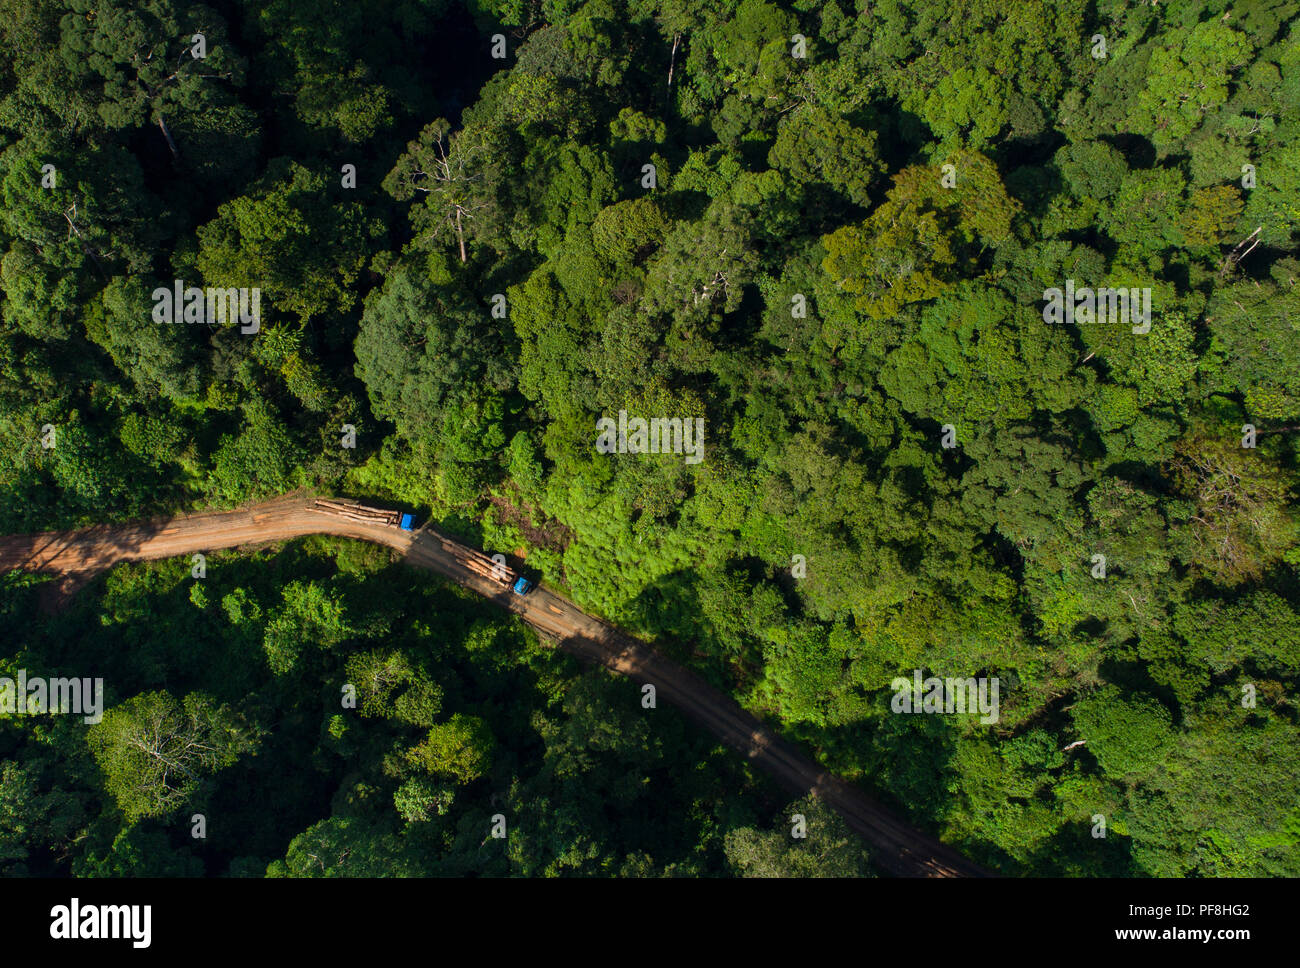 Drone photo of loaded logging trucks on a logging road through Deramakot Forest Reserve, Sabah, Malaysian Borneo Stock Photo